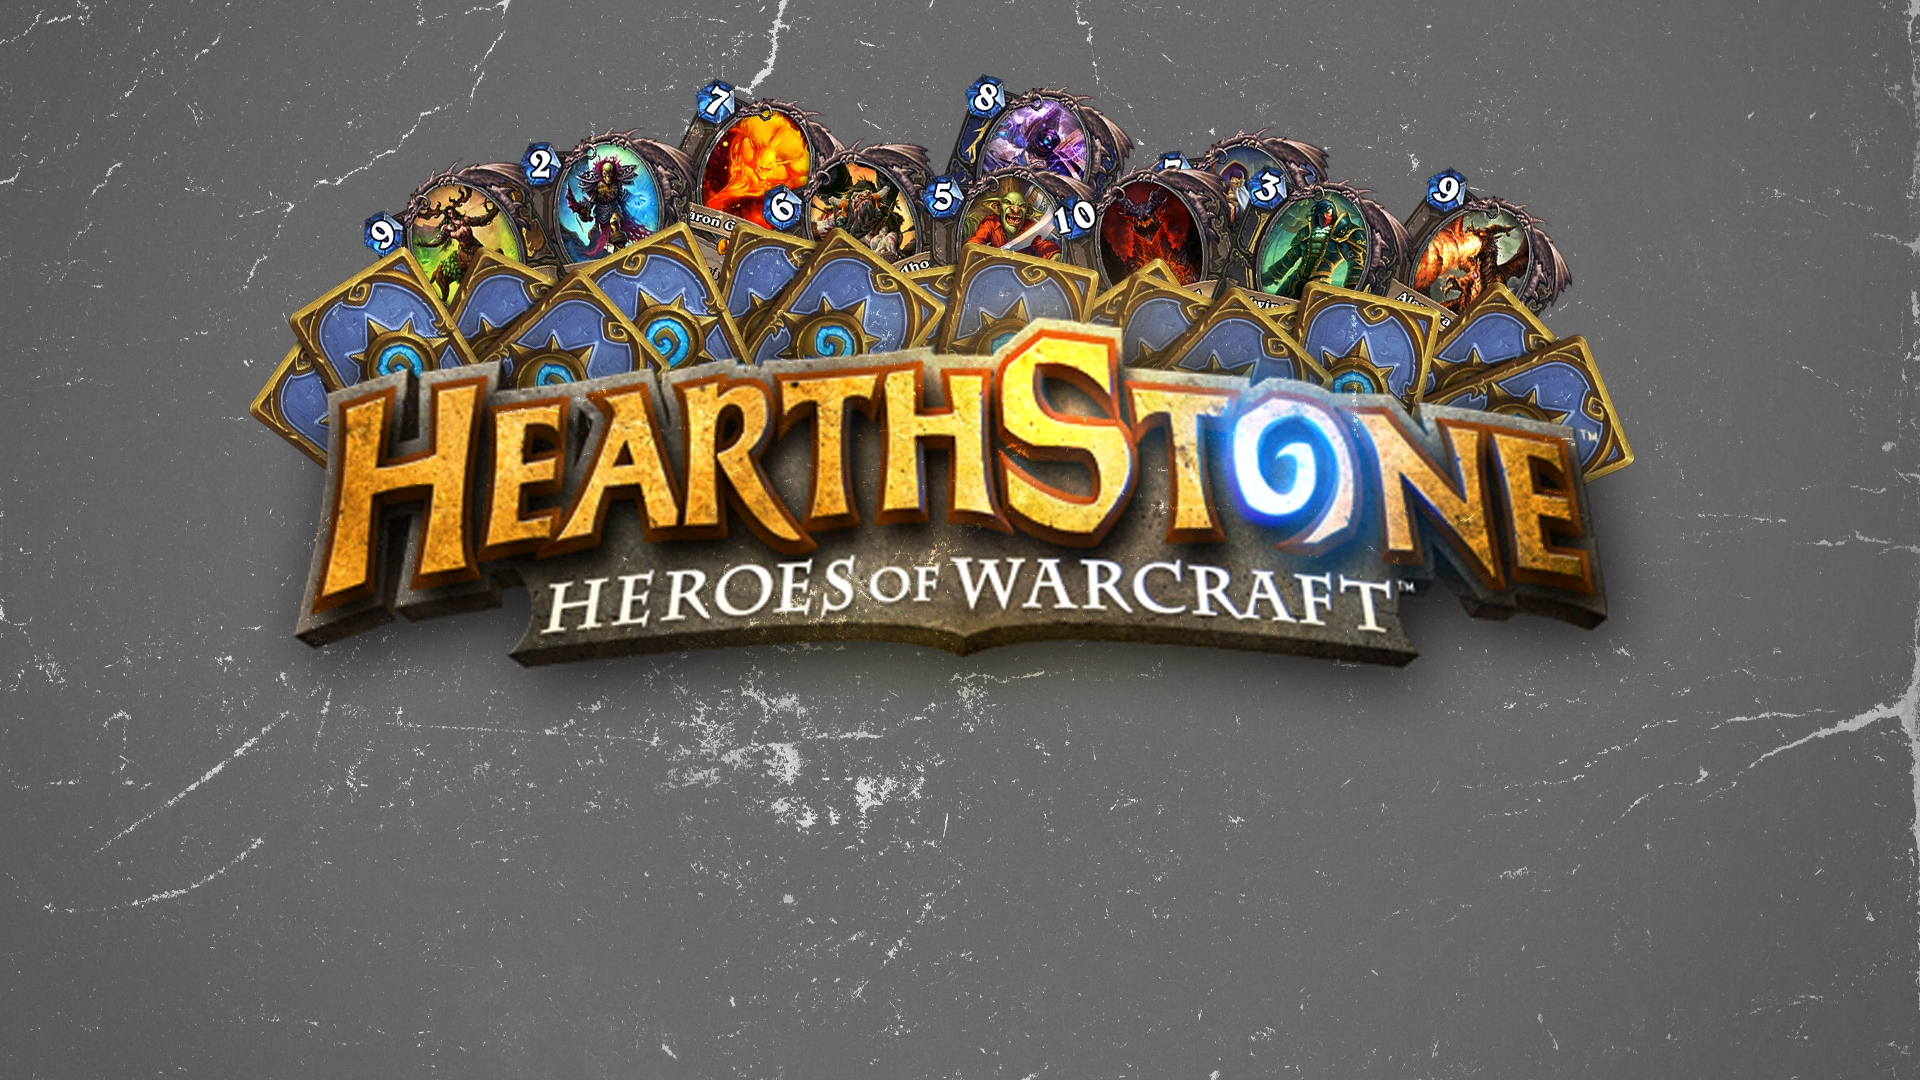 Hearthstone Heroes Of Warcraft Maps Texture Logo 96968 - Hearthstone Heroes Of Warcraft Logo - HD Wallpaper 